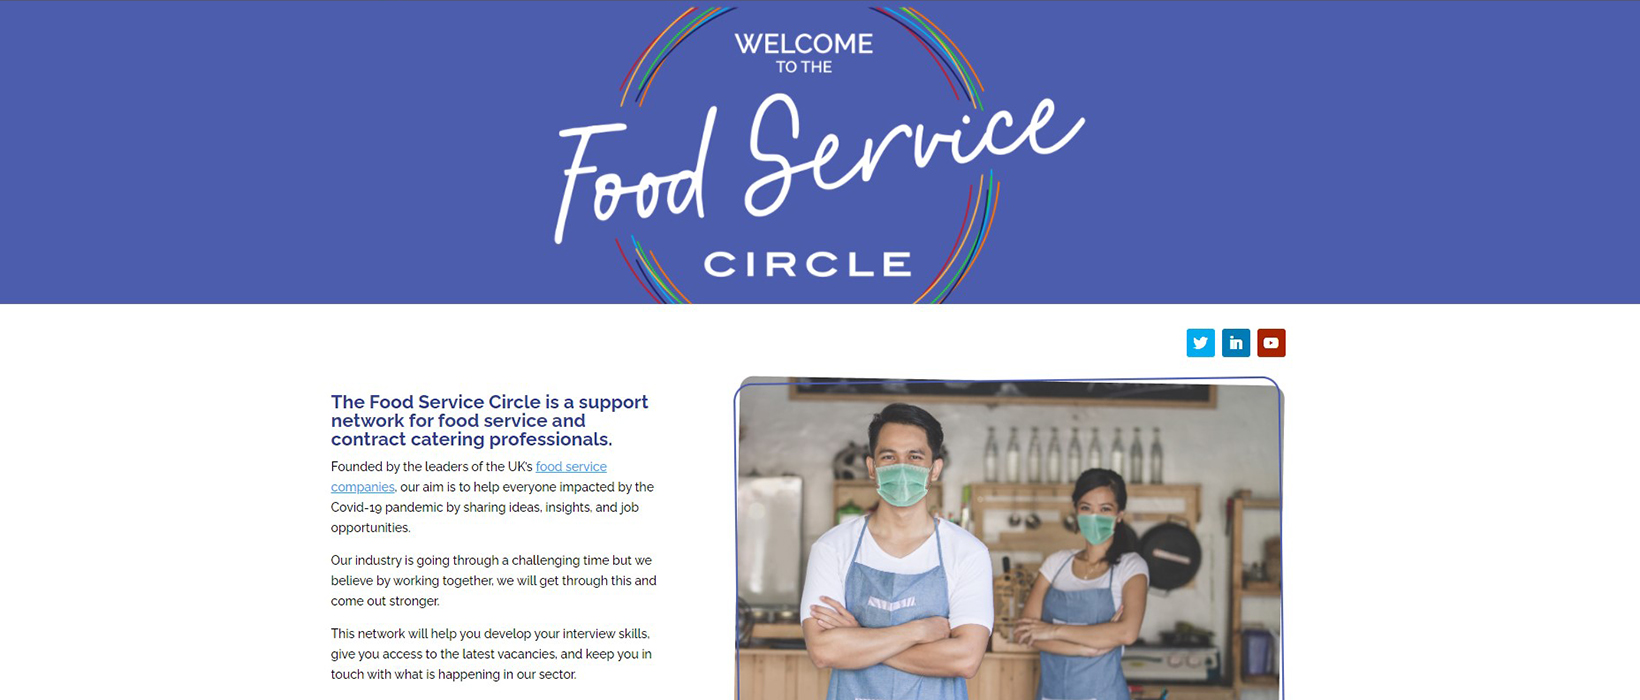 Caterers collaborate on platform to support former employees